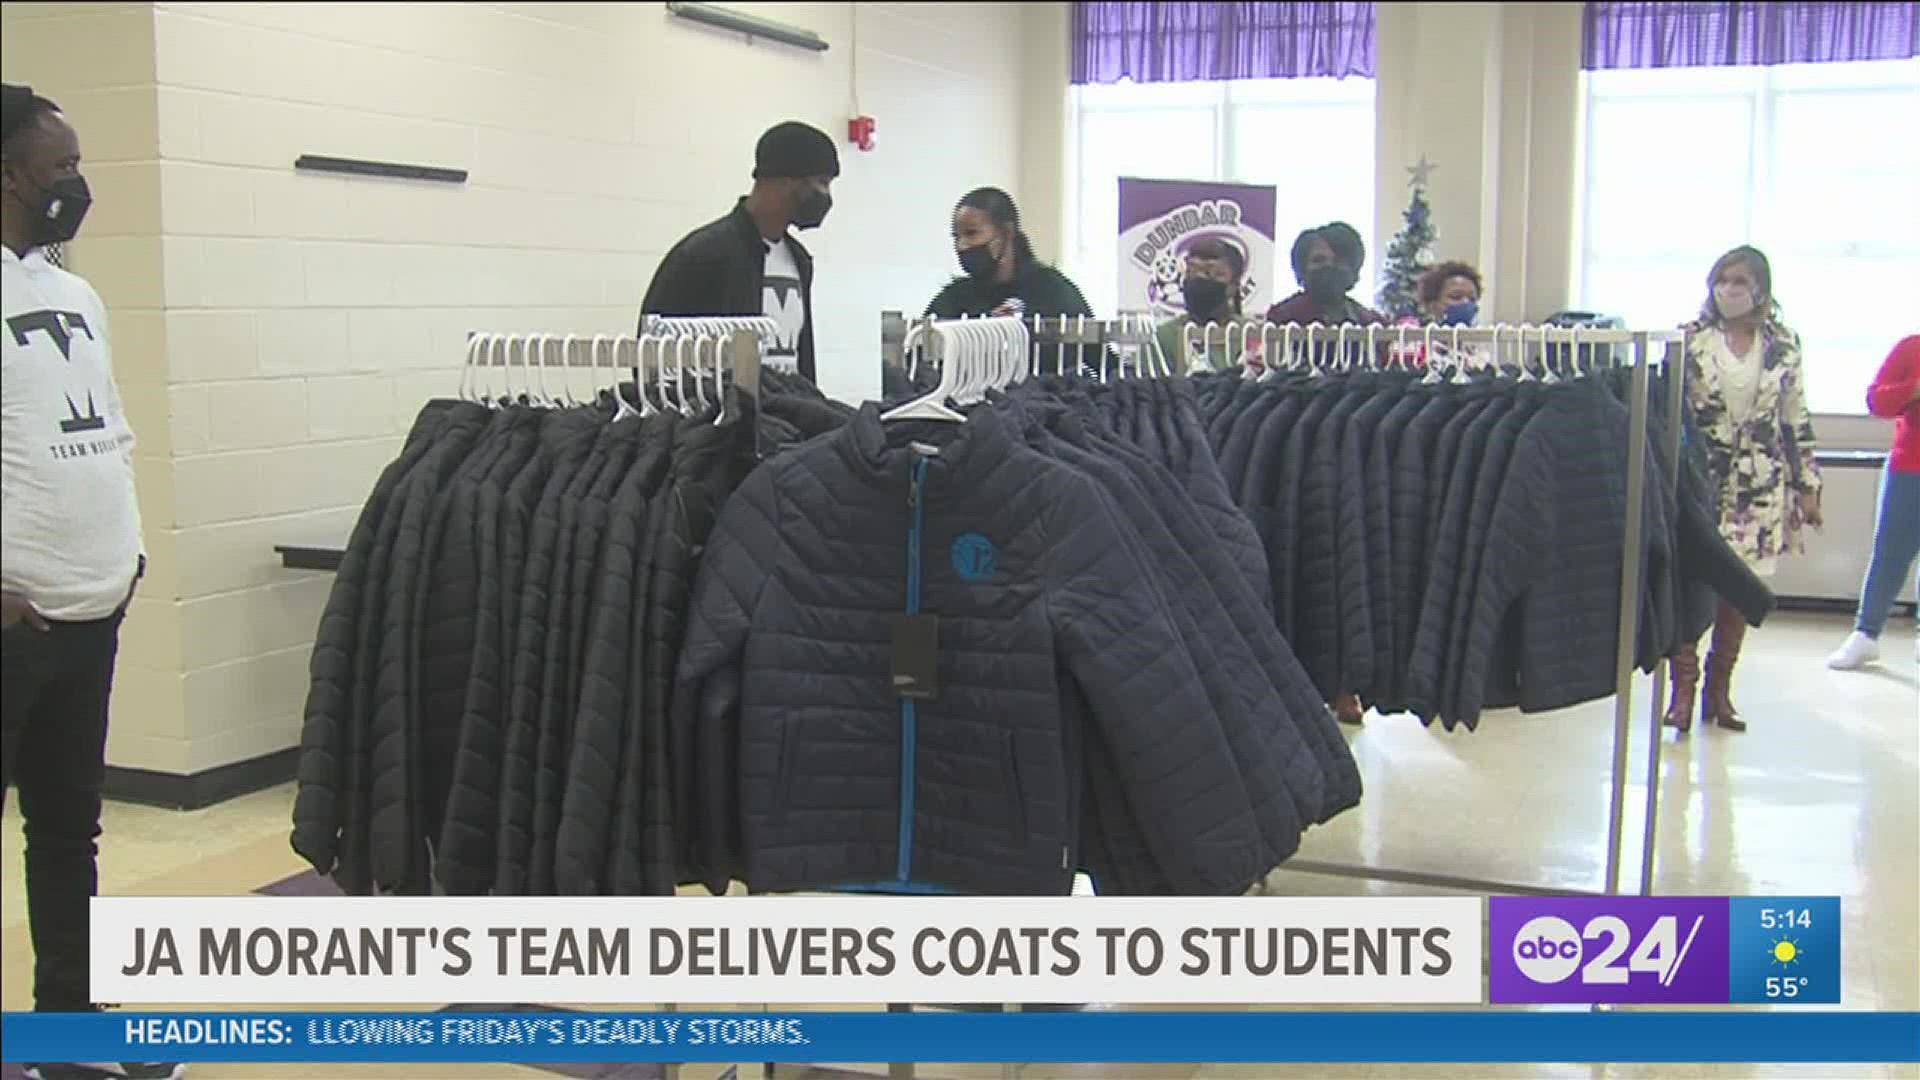 Monday, Morant’s team was at Dunbar Elementary delivering coats the Grizzlies star bought for students.